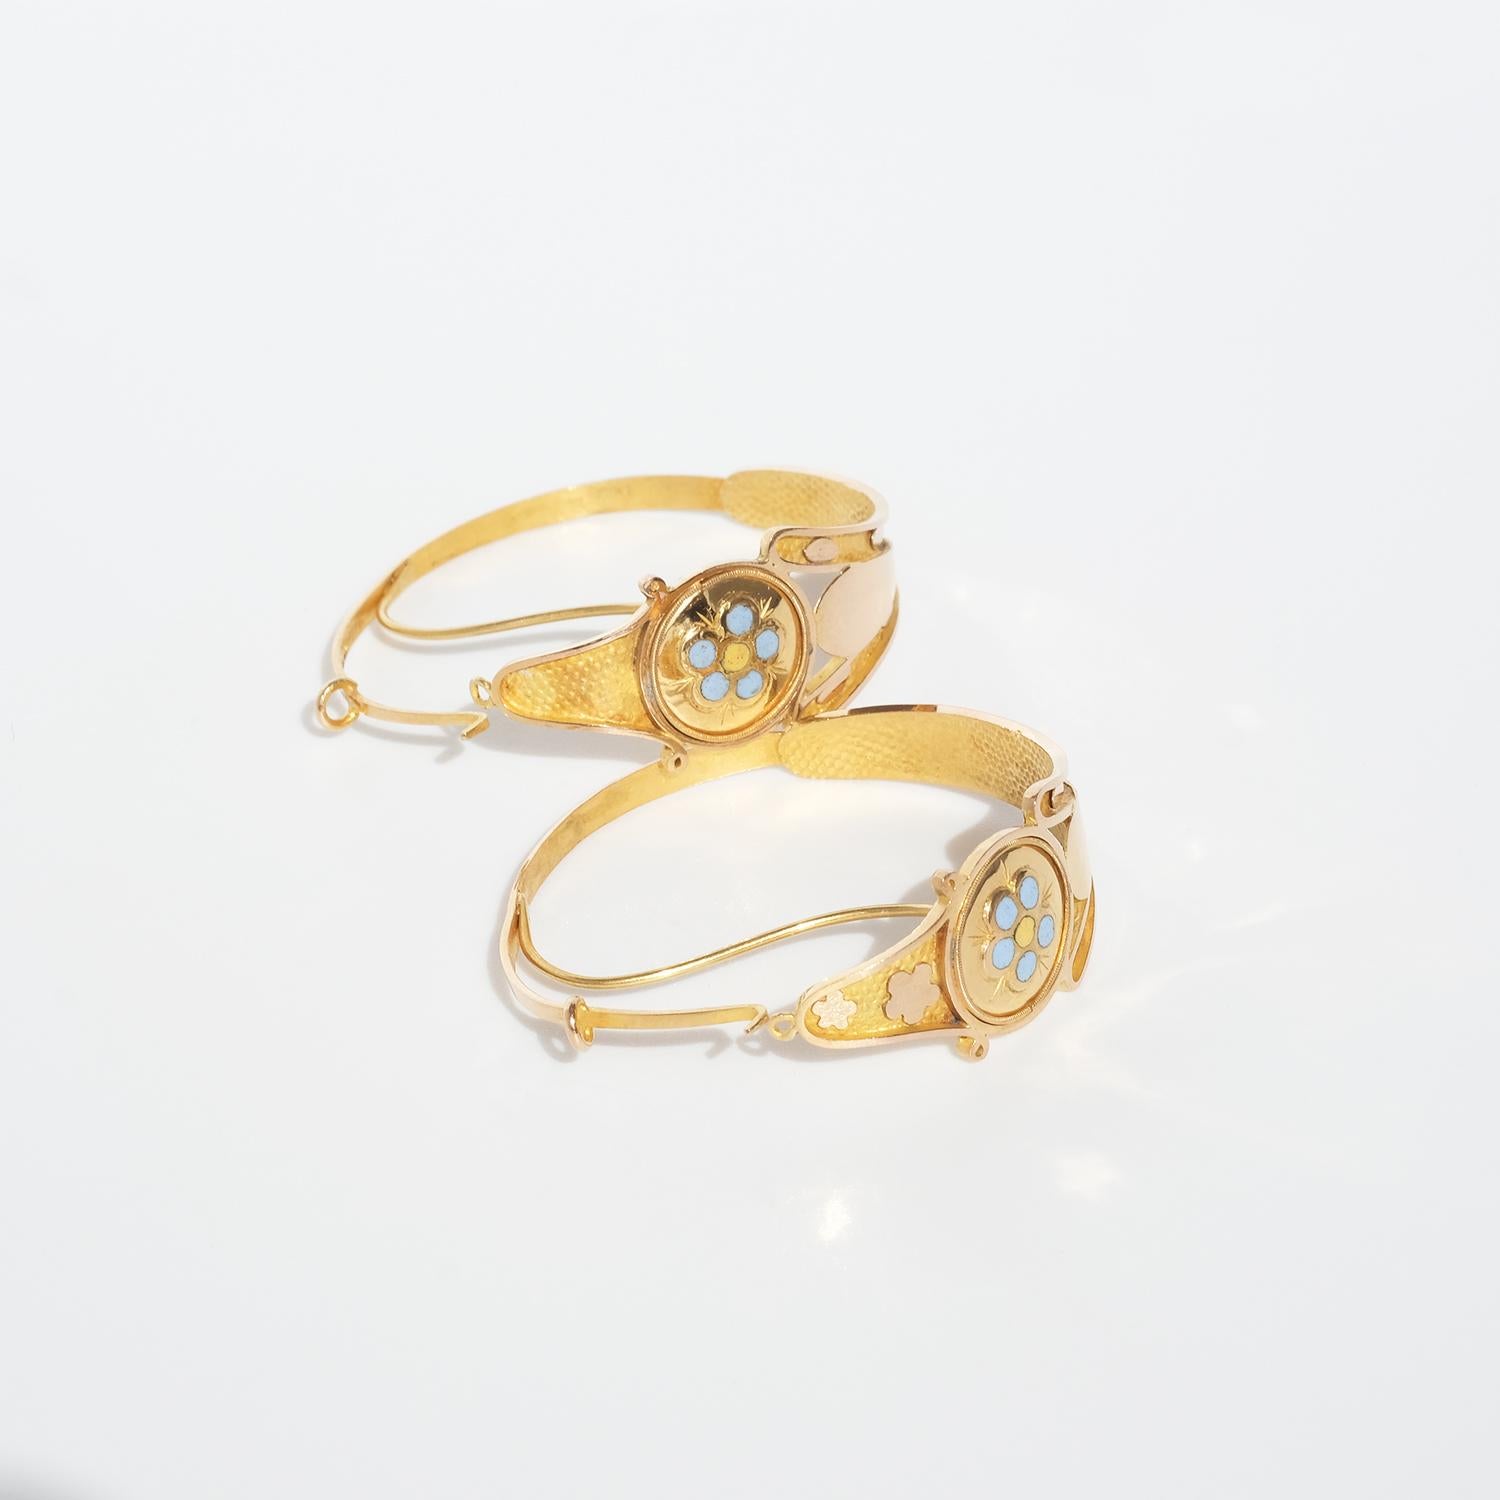 Empire Pair of 18 K Gold Earrings Made Year 1820